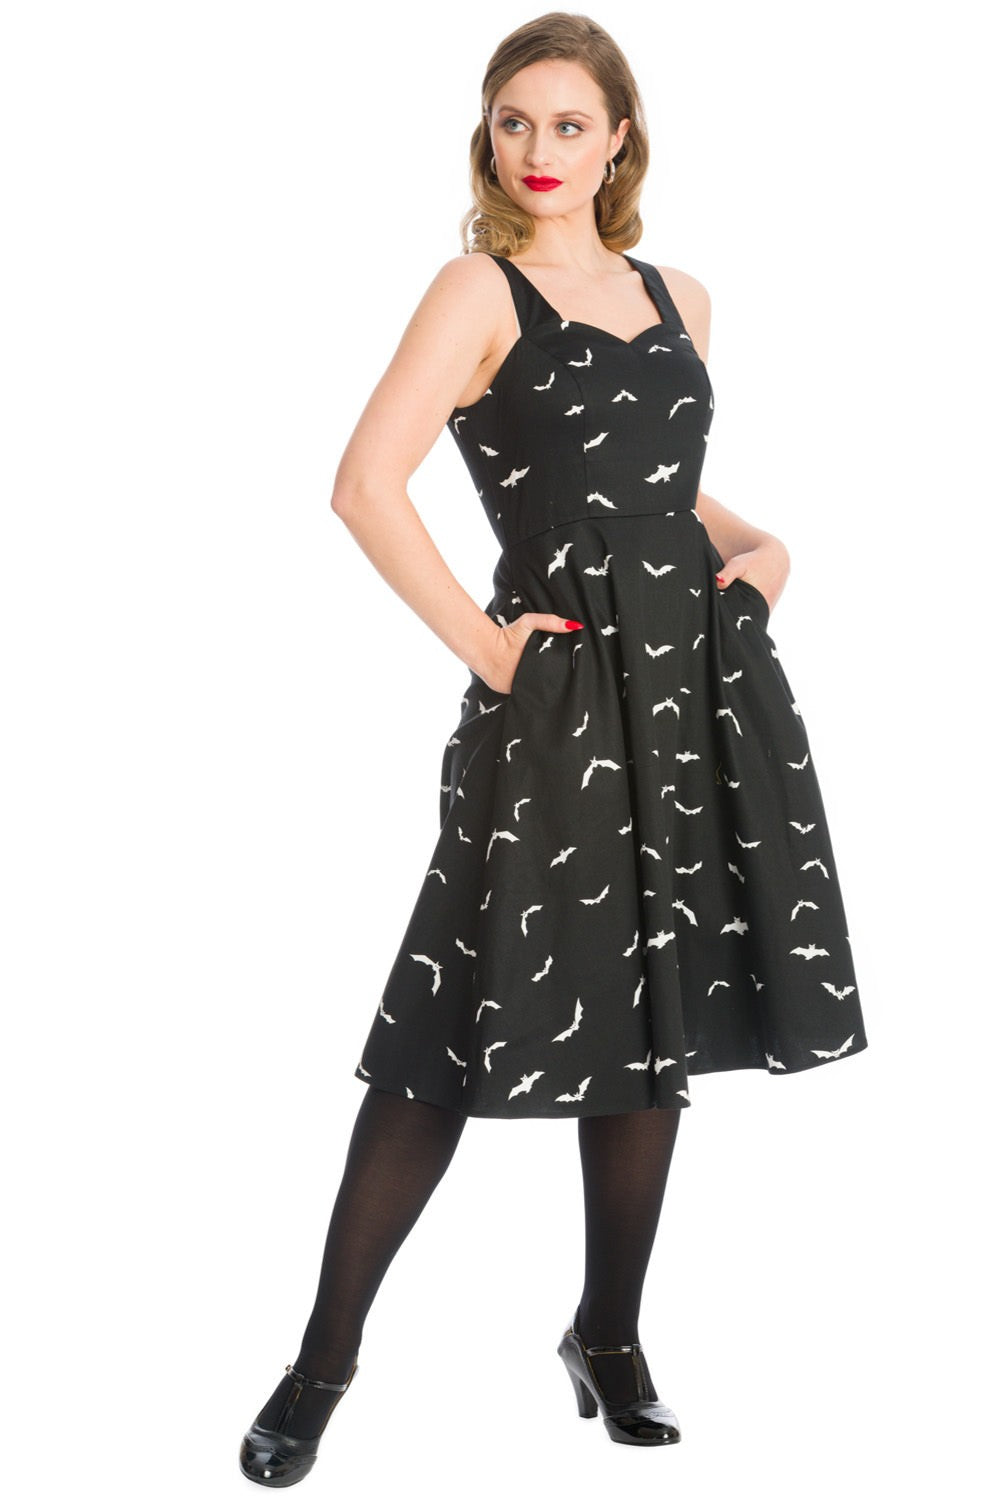 Banned Shes Batty For You Bat Rockabilly Swing Dress